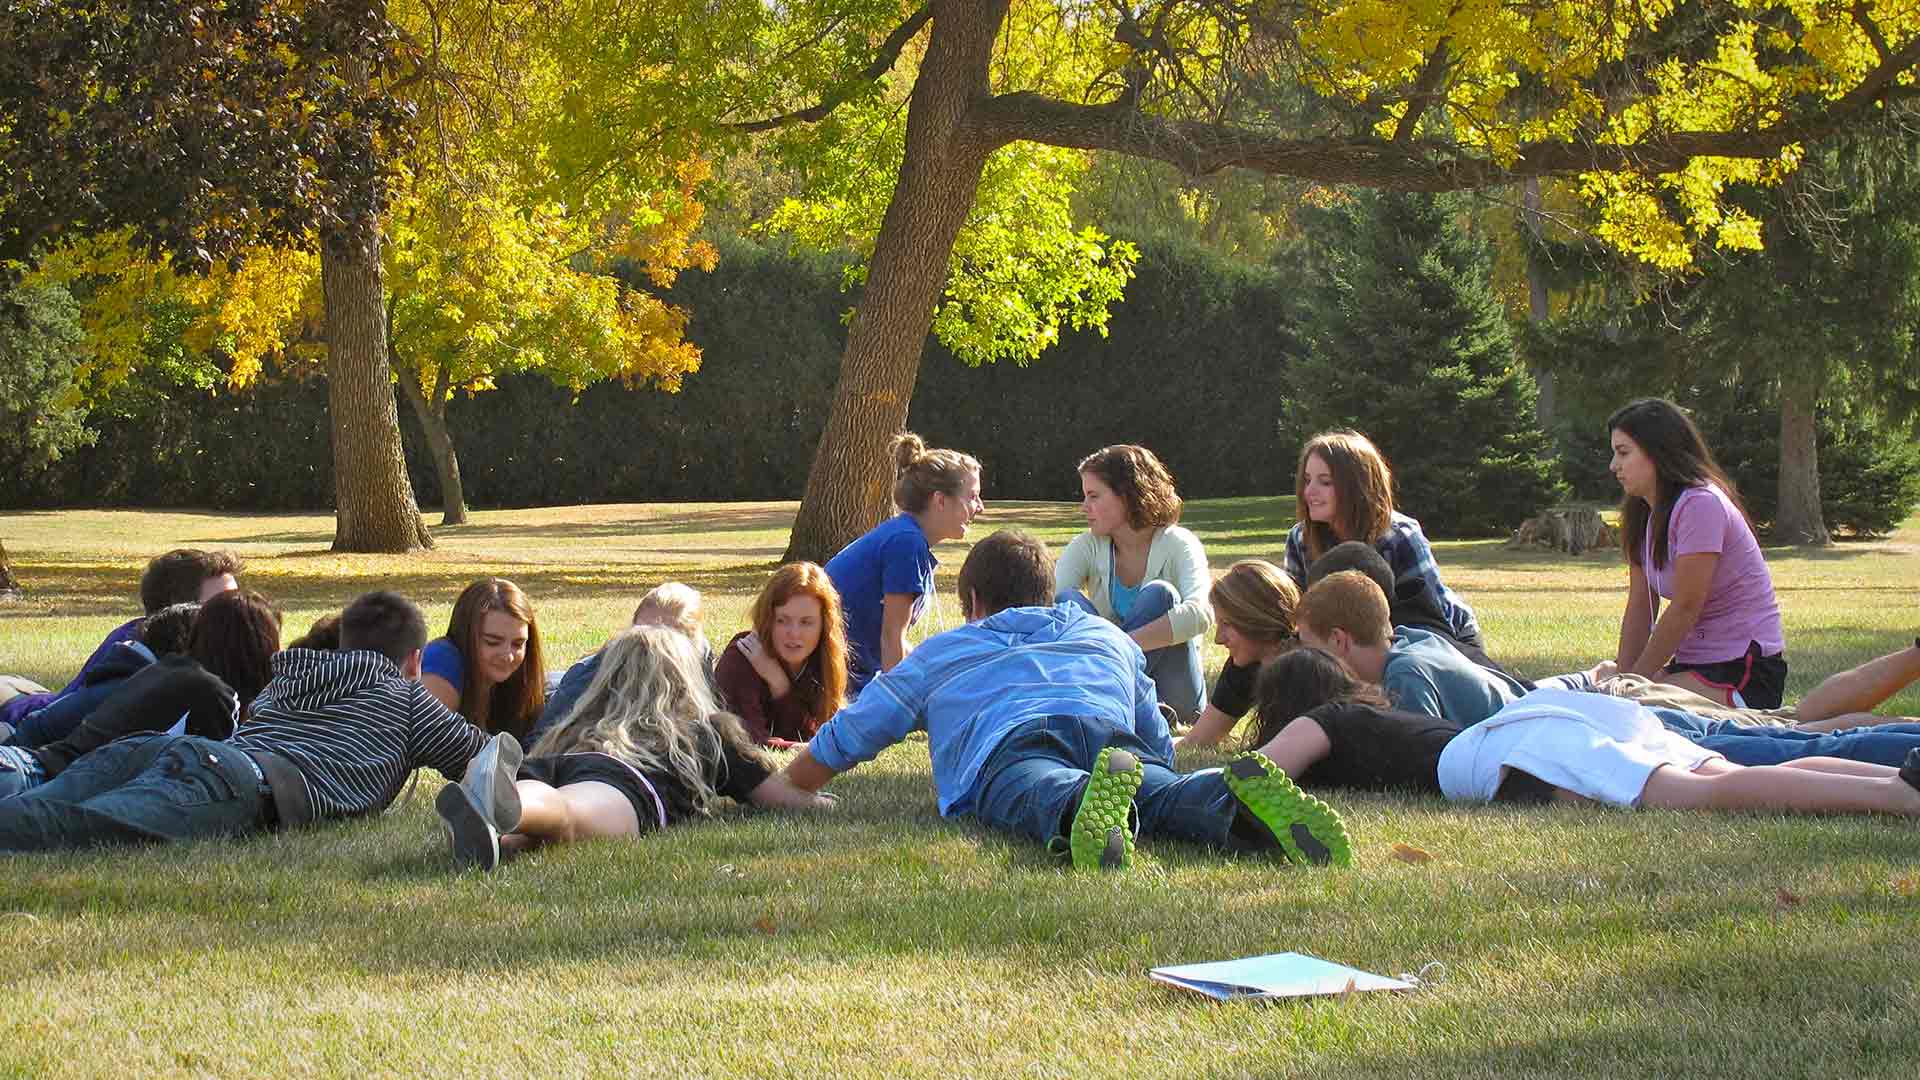 Faith Sharing Small Group Meeting On Lawn